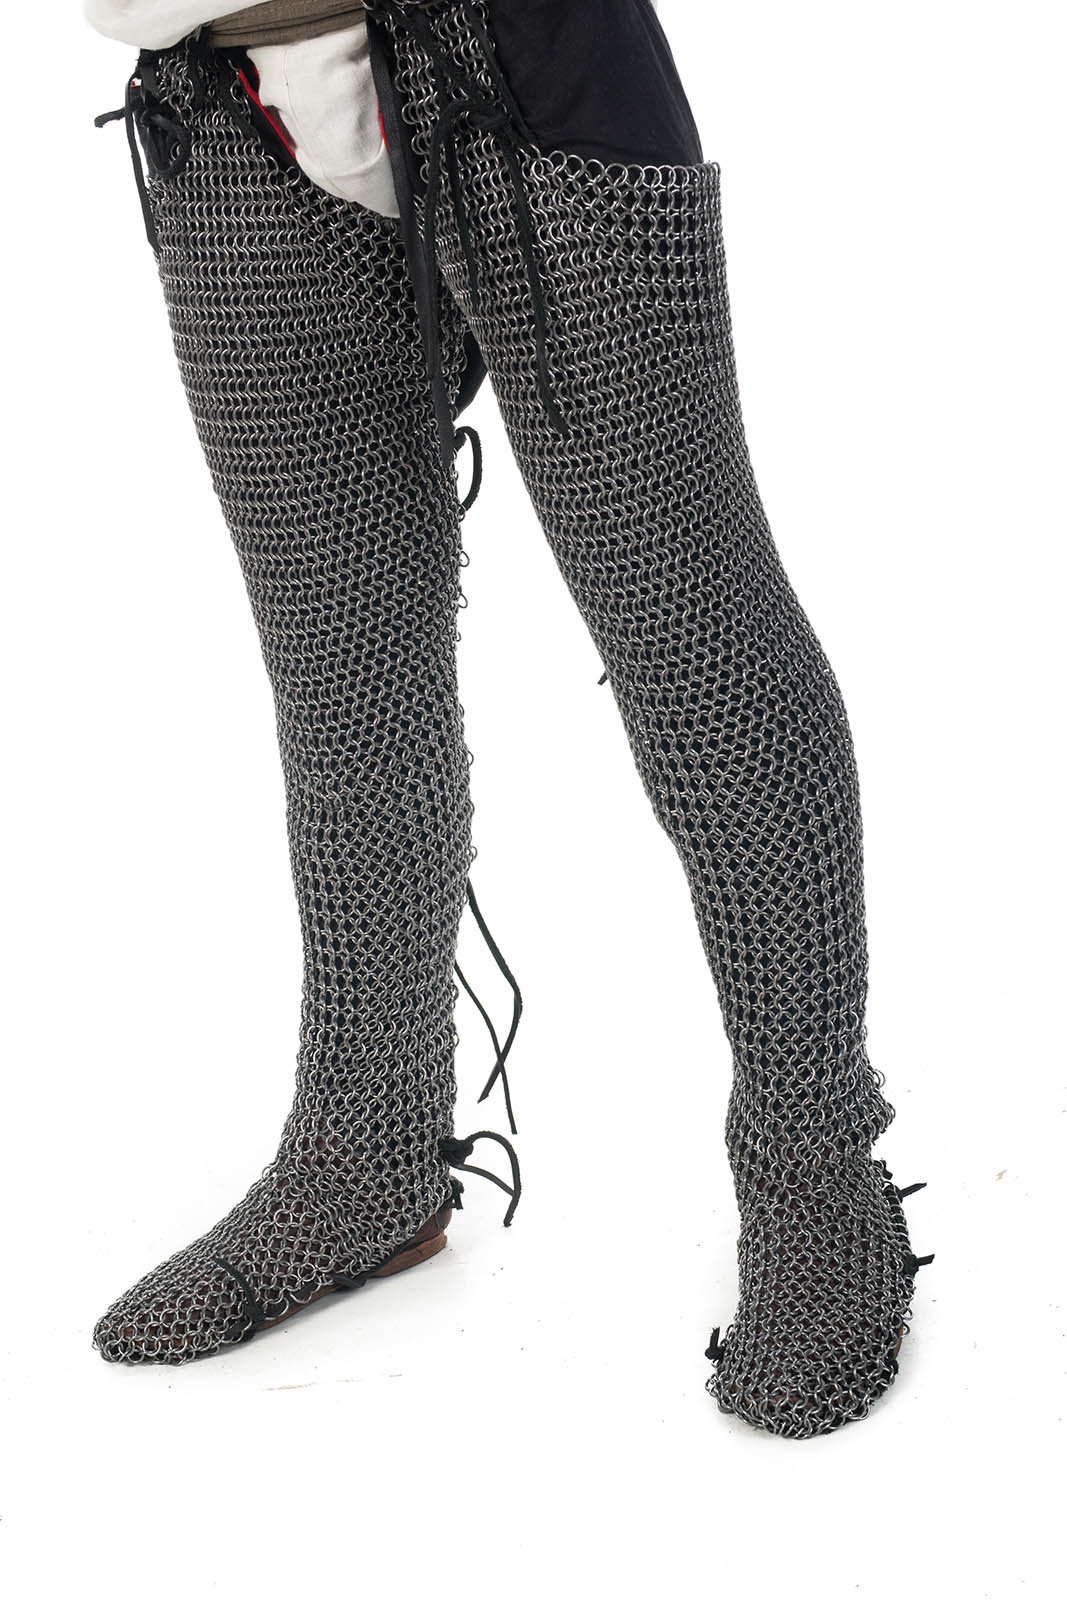  Chainmail Leggings 9mm Flat Riveted Flat Washer Chainmail  Chausses Medieval Battle Armor Chain Mail SCA LARP (Black Finish) :  Clothing, Shoes & Jewelry